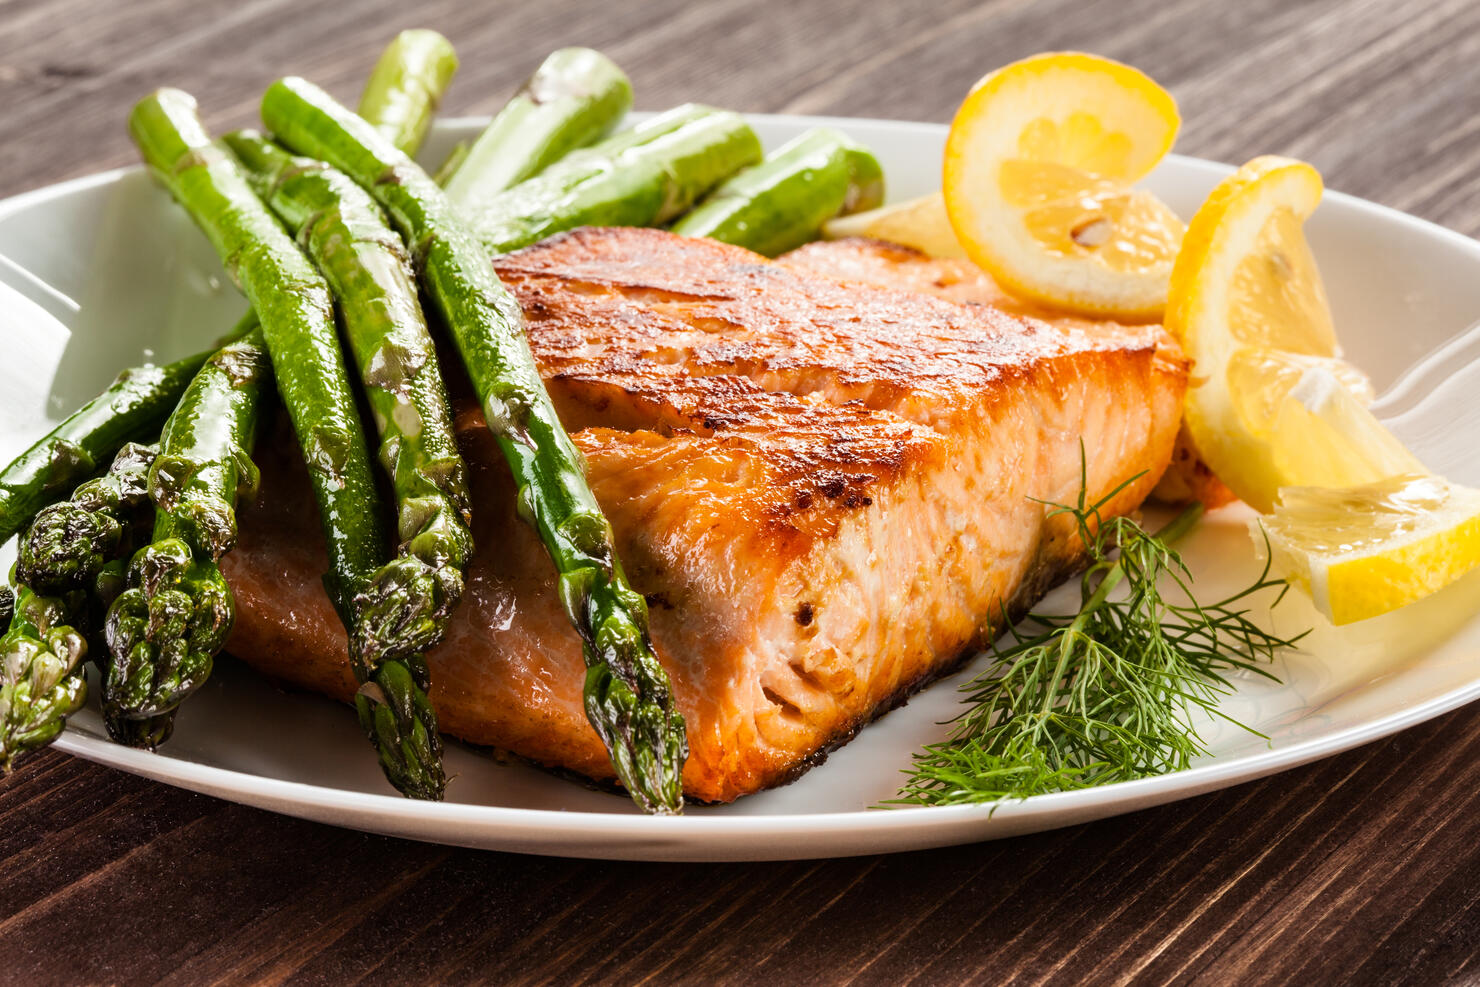 Grilled salmon with French fries and asparagus